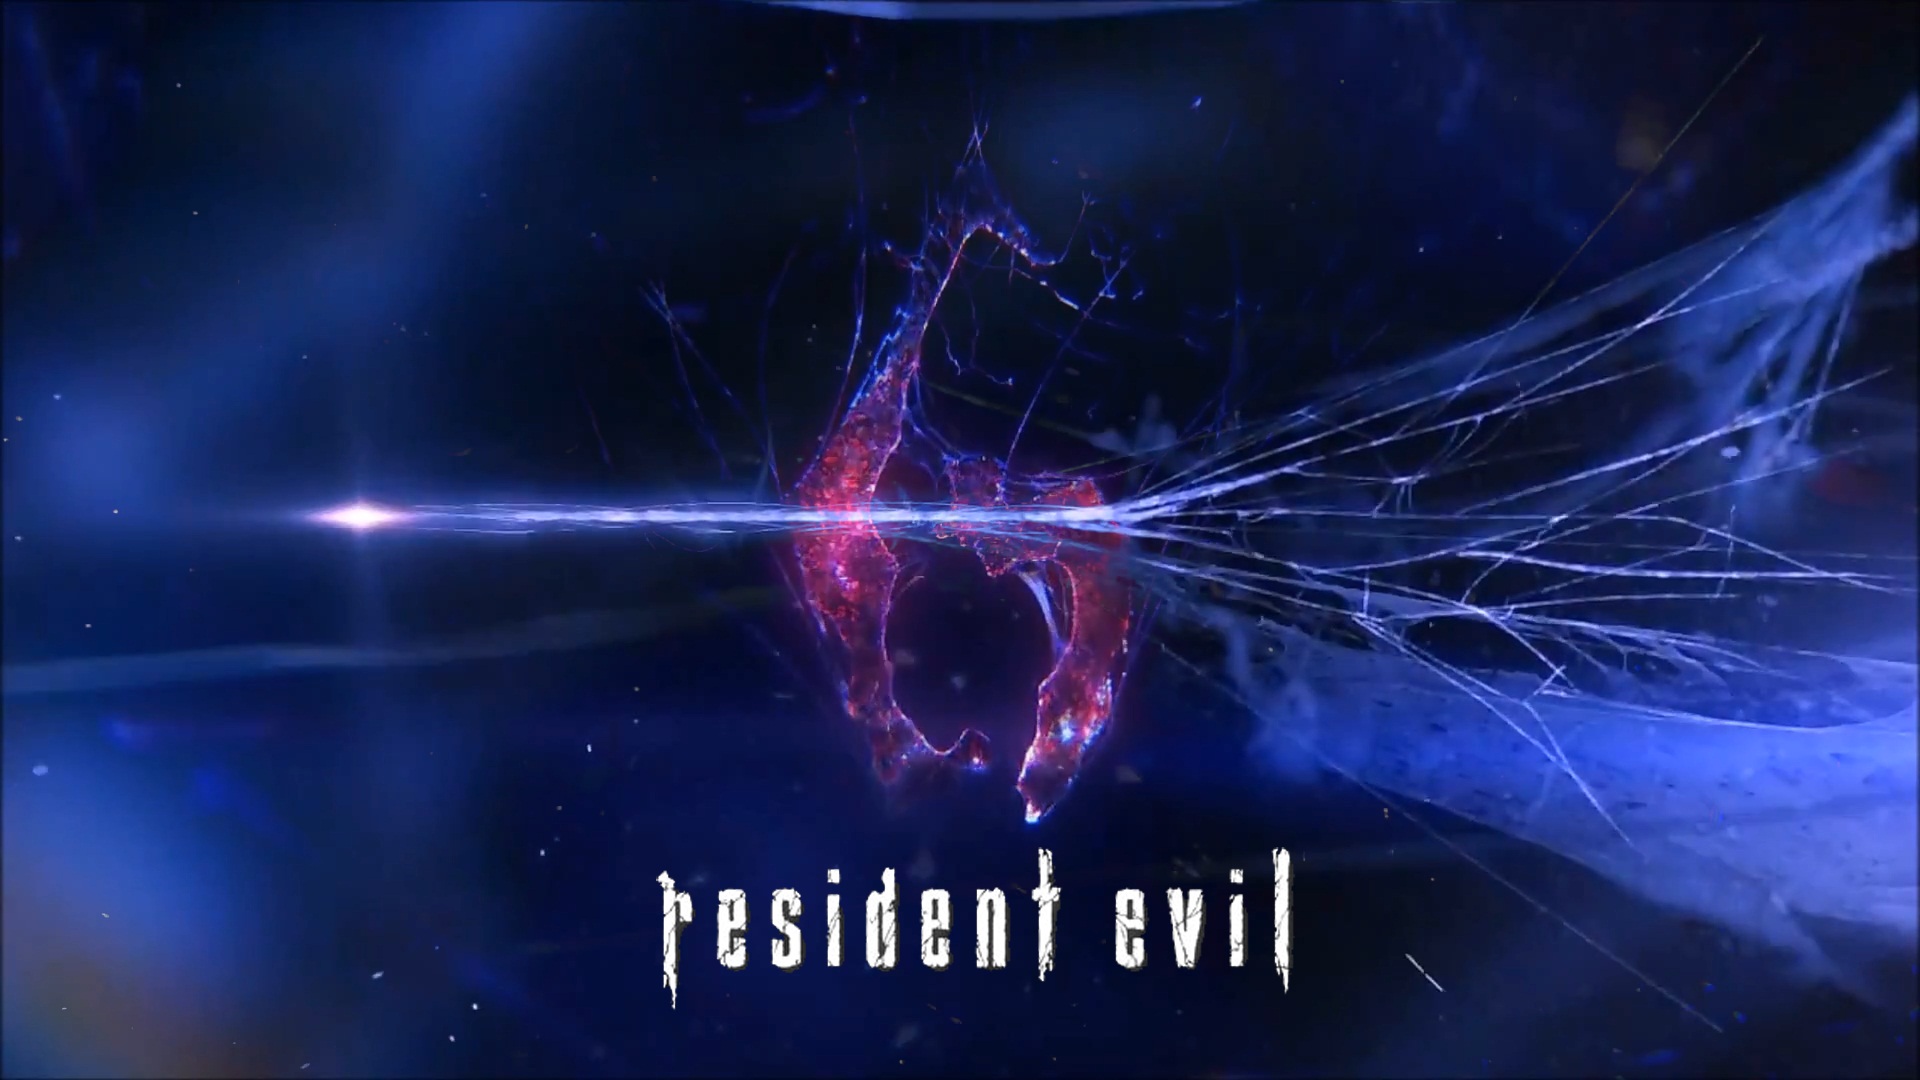 Resident Evil 6 HD game wallpapers #12 - 1920x1080